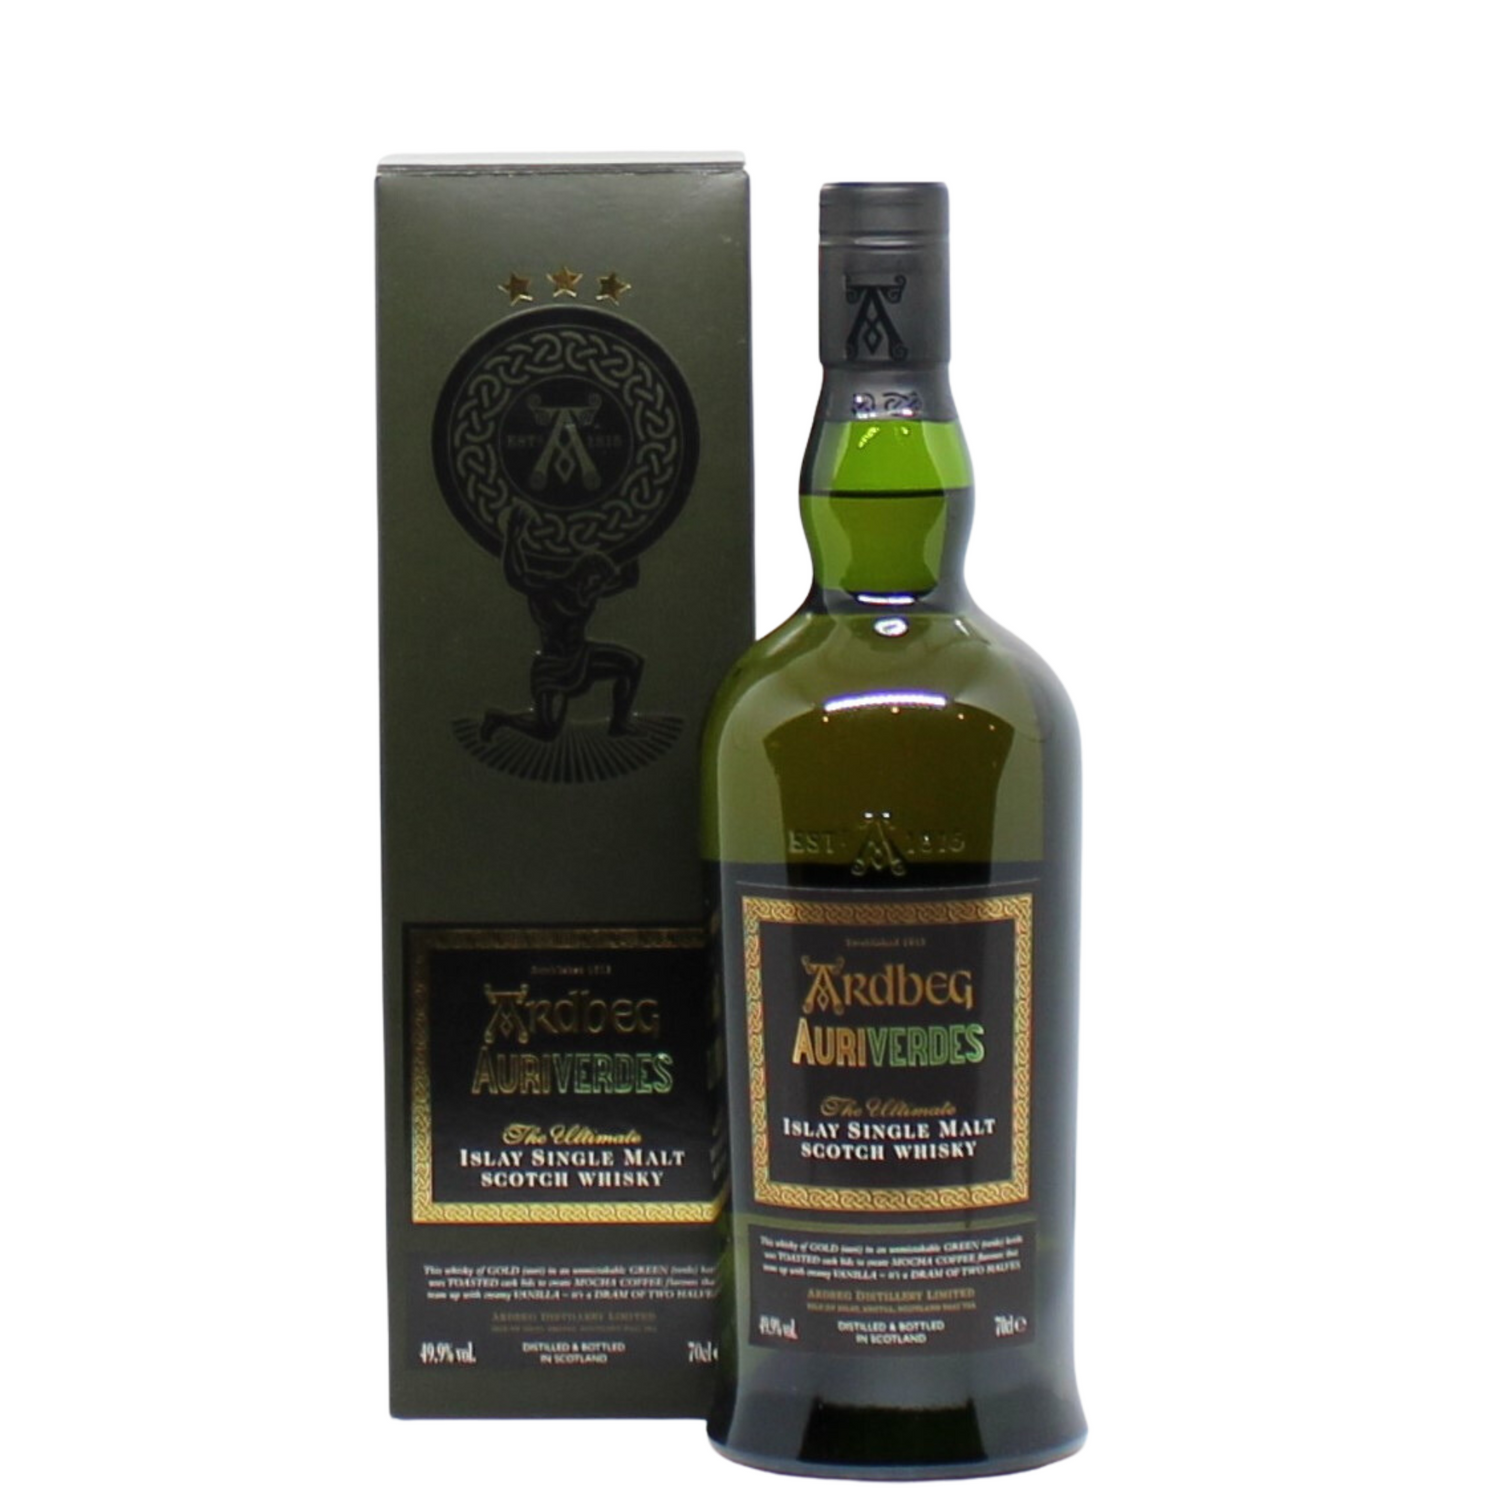 A 2002 Vintage Single Malt Whisky from Ardbeg matured in American Oak Casks and released for Feis Ile 2014. About 66,600 bottles were released. The name Auriverdes captures the imagery of the gold (auri) and green livery of Ardbeg's bottlings (verde) apart from being the colours of the Brazilian flag, home of the 2014 World Cup (Soccer)